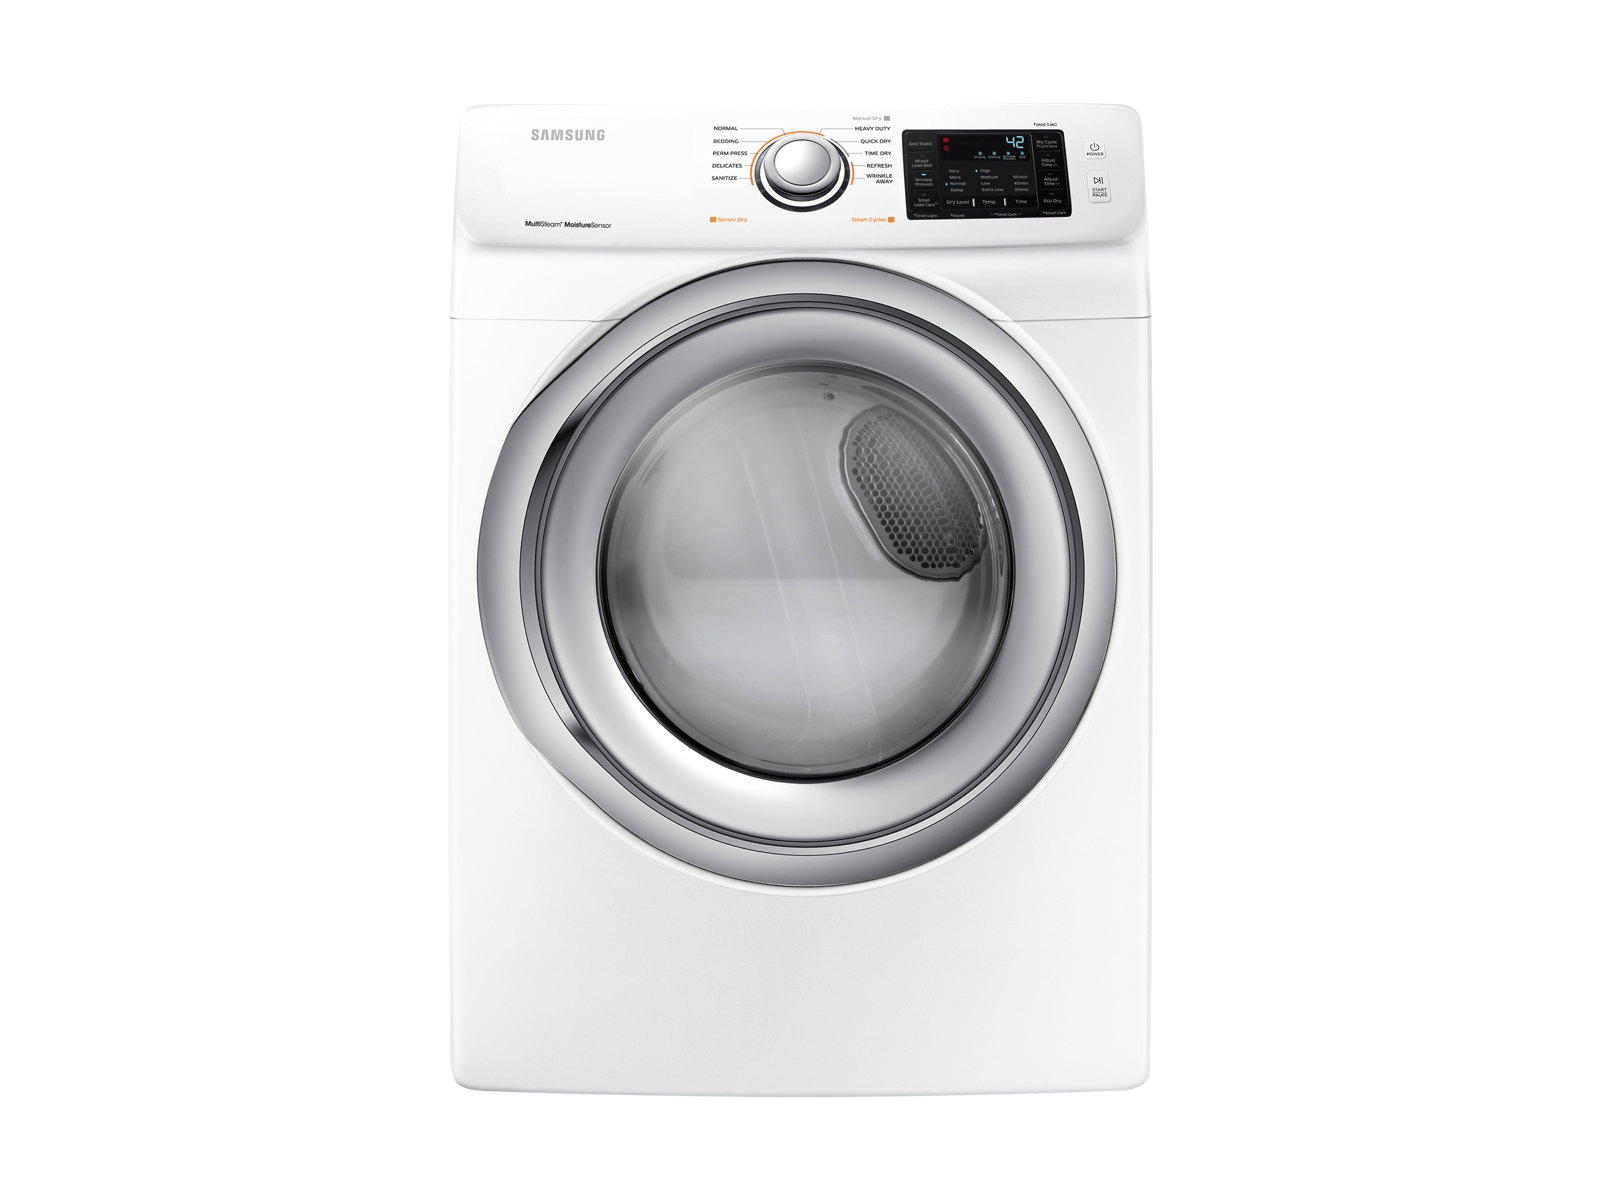 7.5 ft. Gas Dryer with in White Dryer DVG45N5300W/A3 | Samsung US